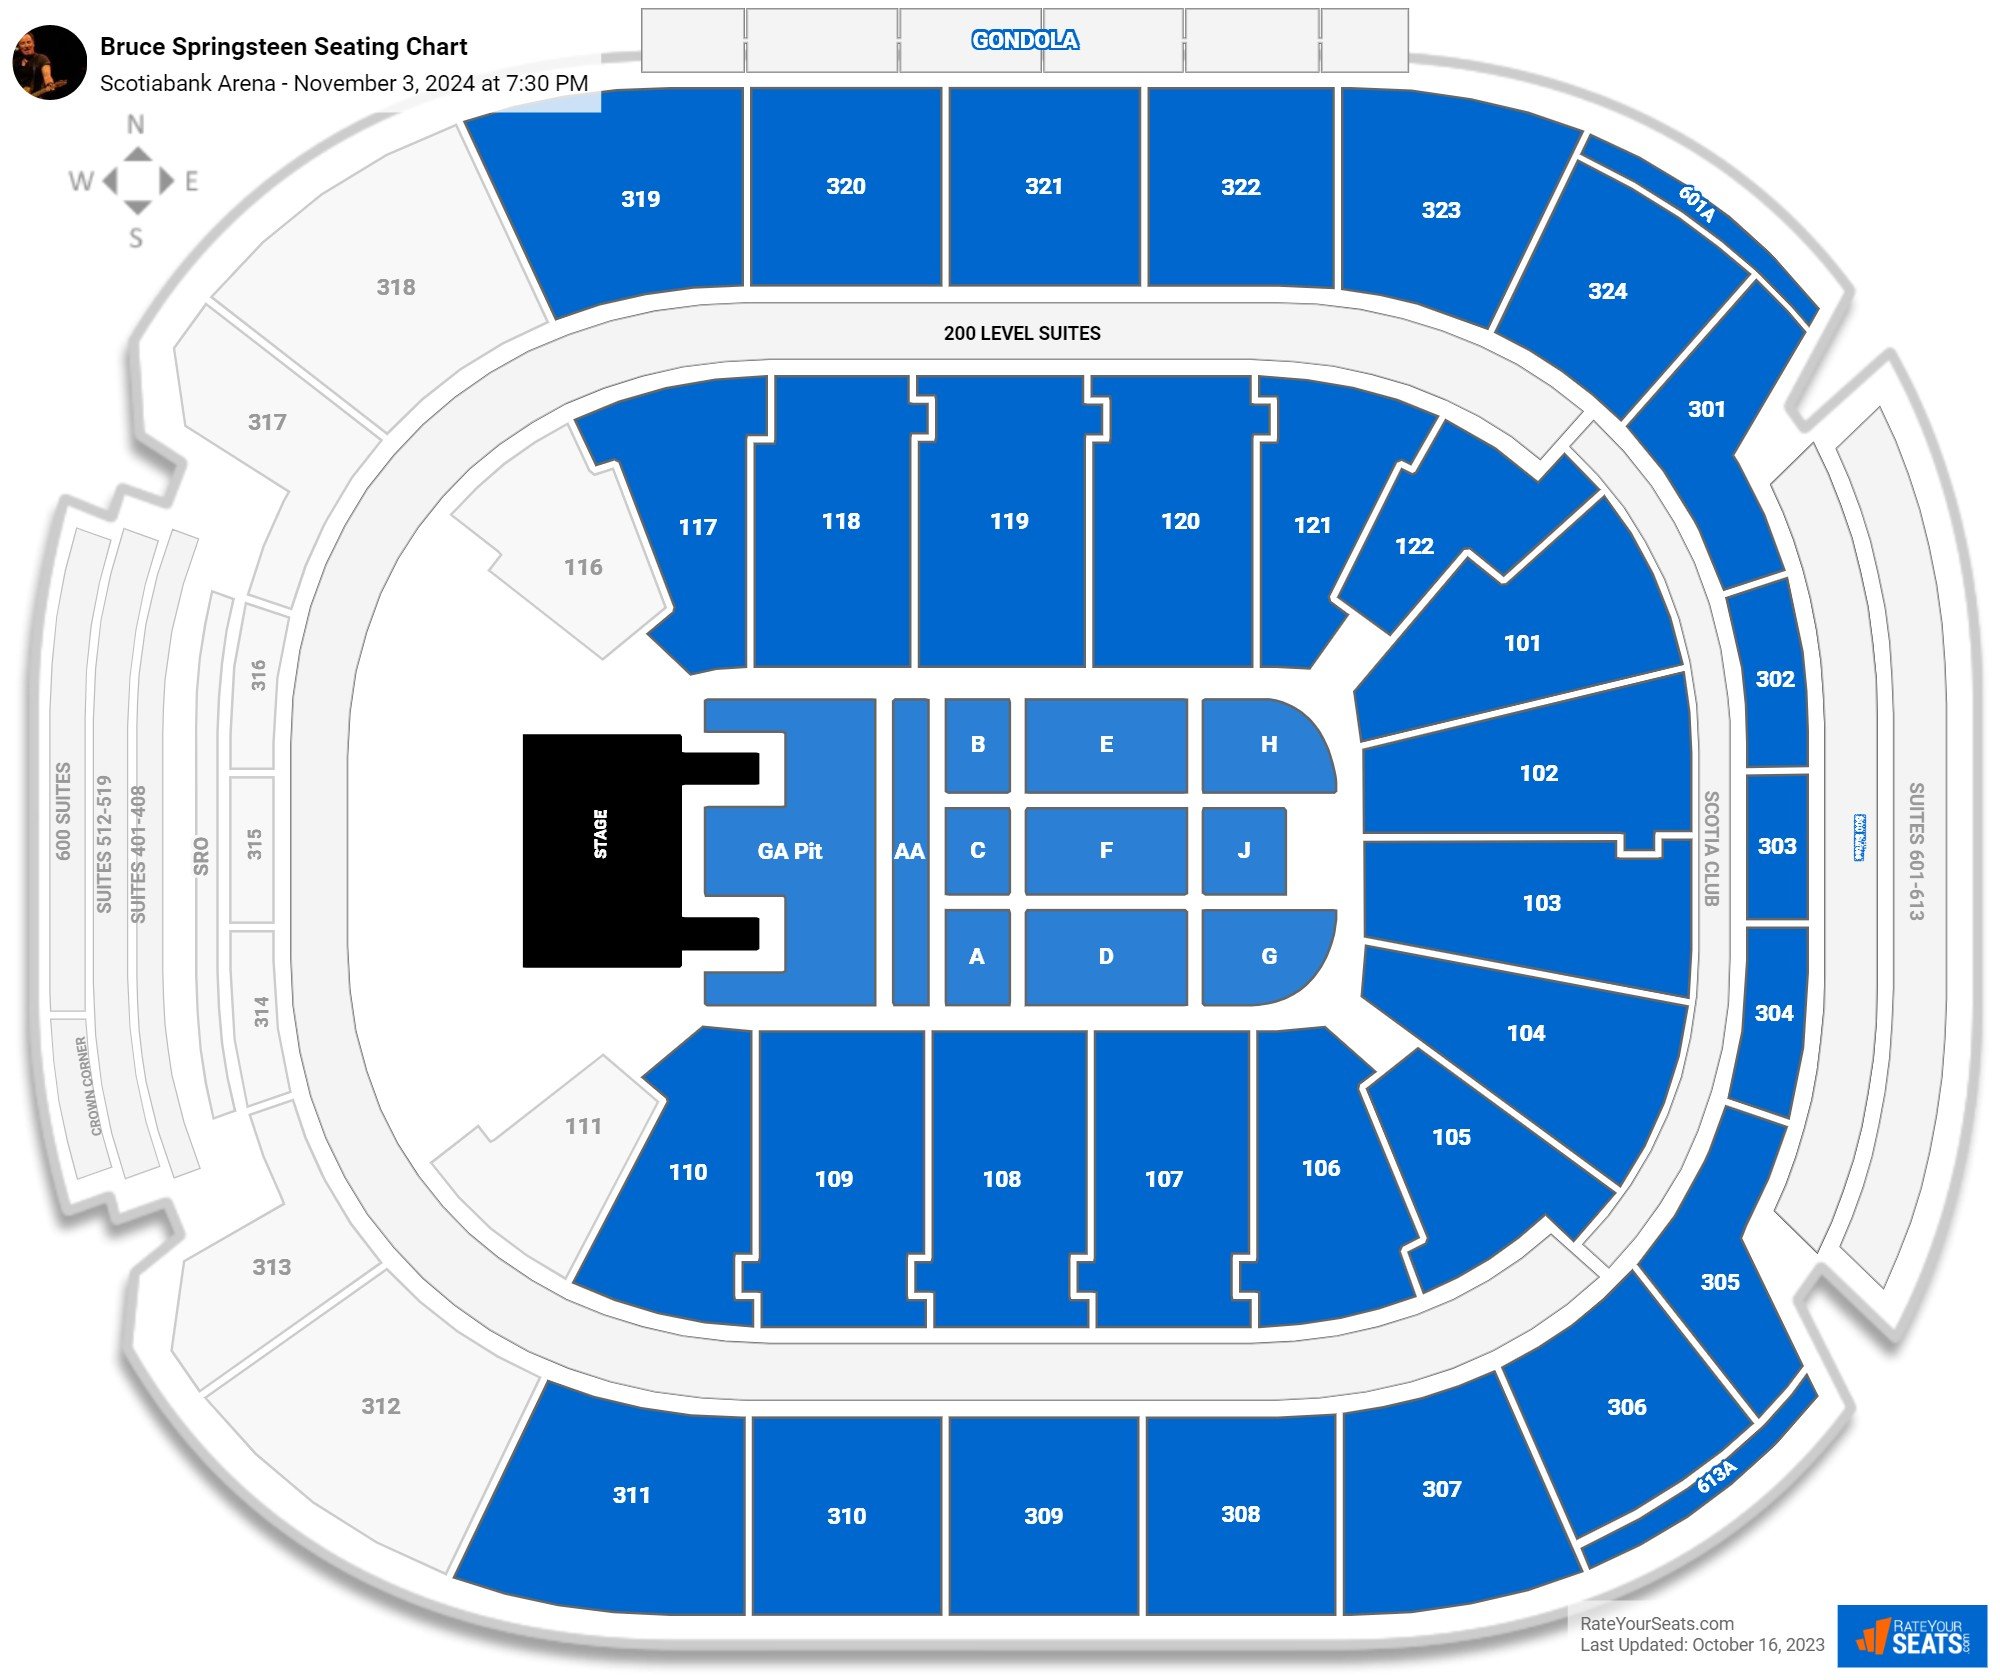 Bruce Springsteen seating chart Scotiabank Arena